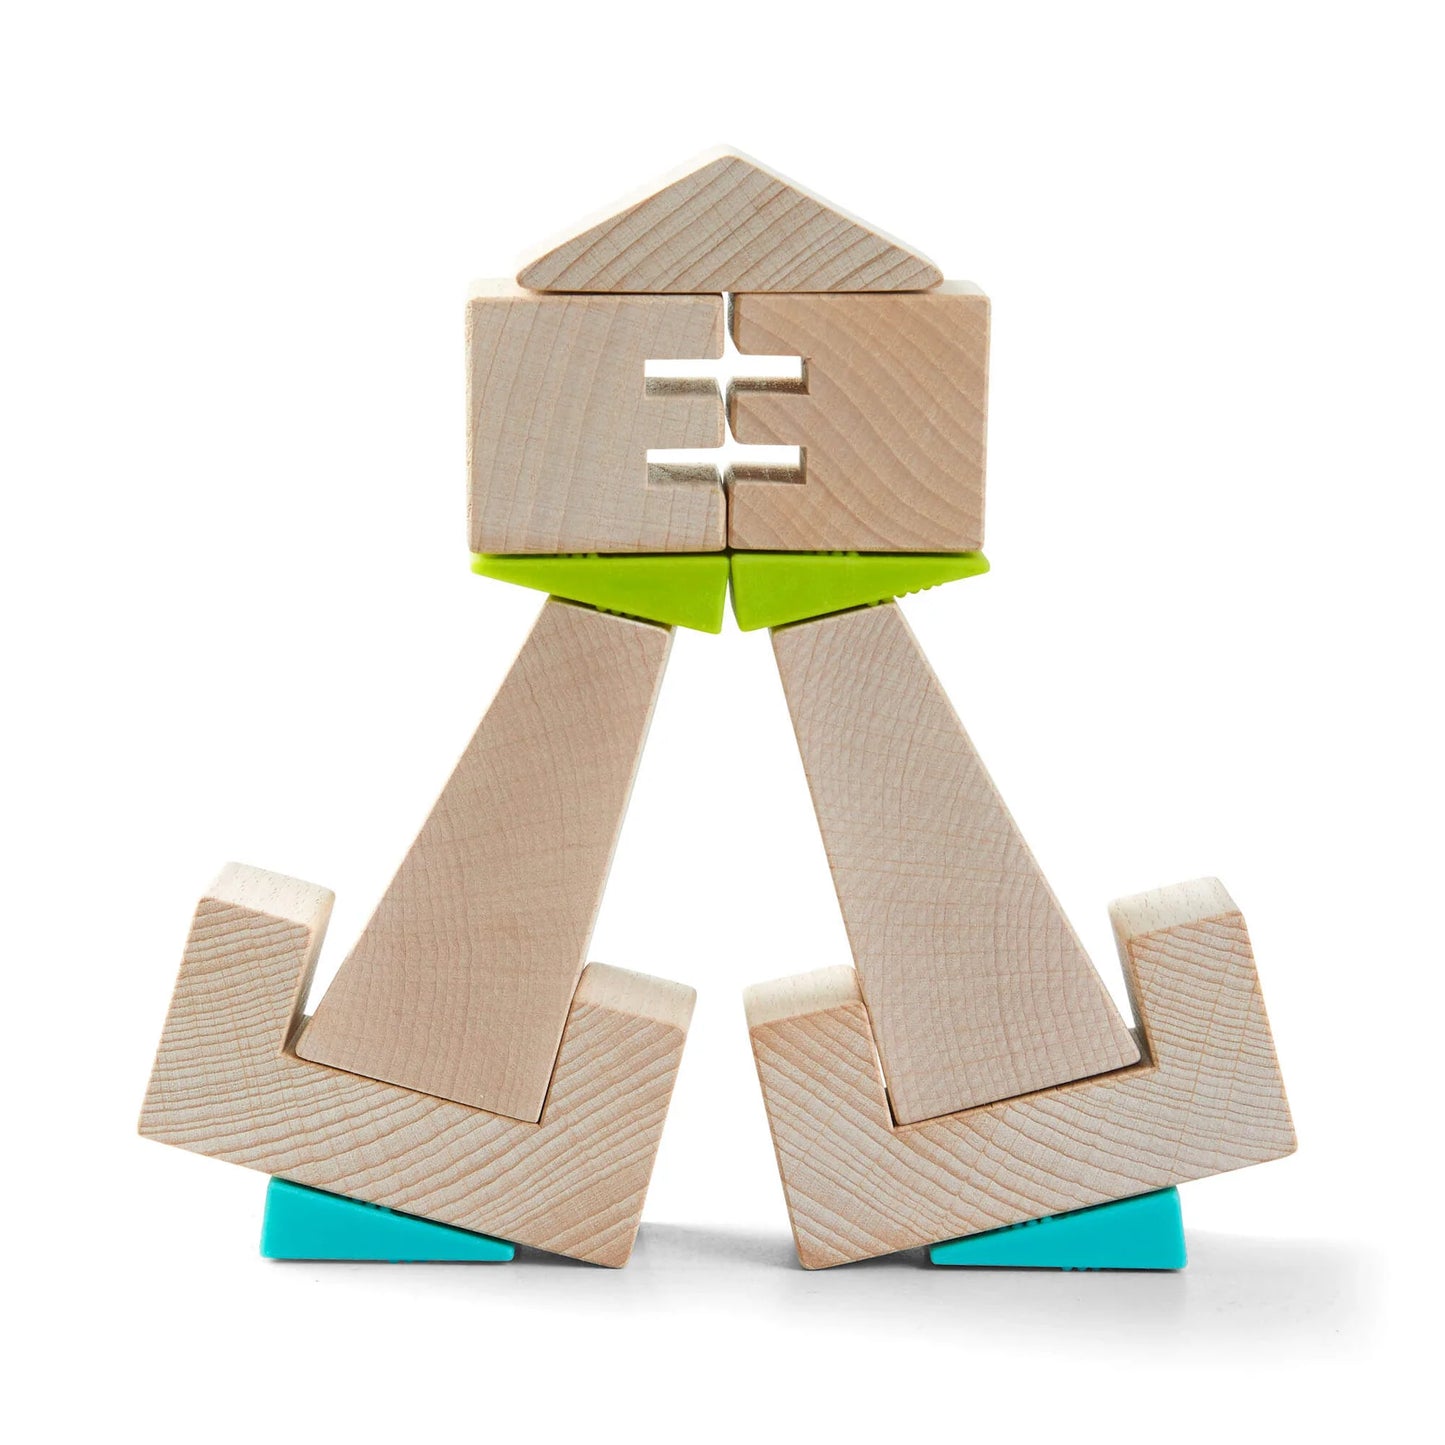 HABA - Crooked Tower Wooden Block